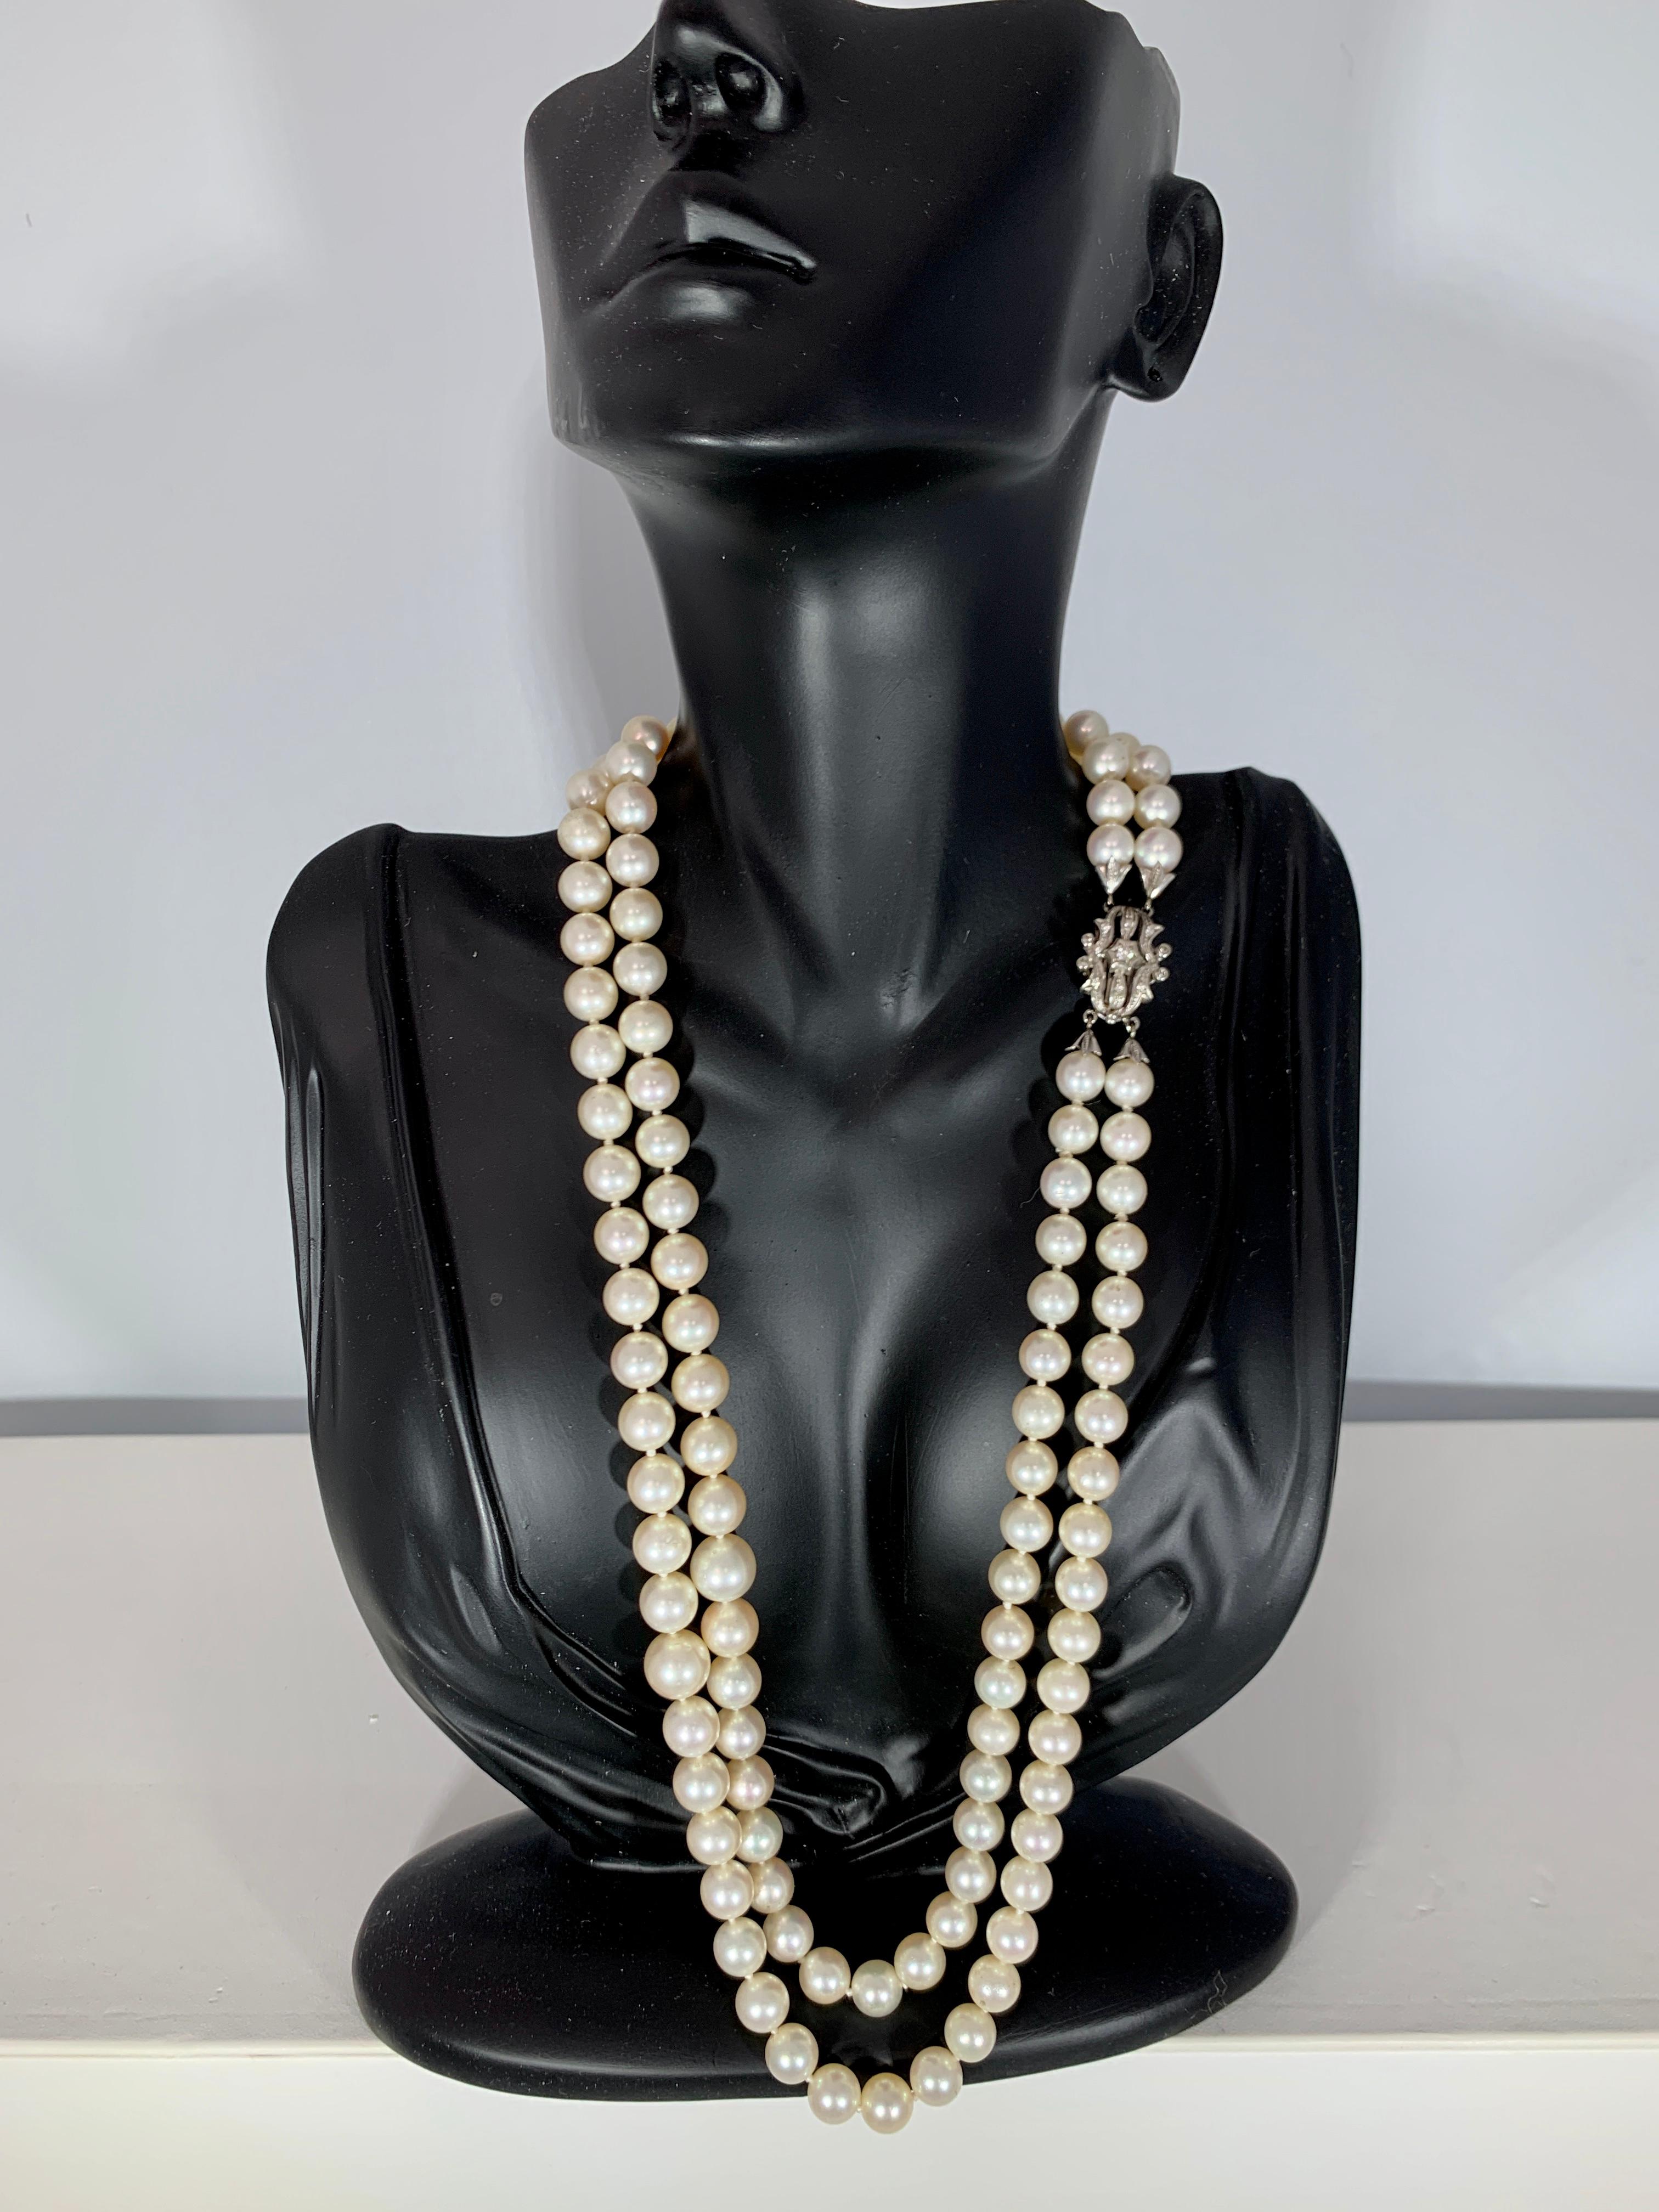 This marvelous vintage Pearl necklace features 2 row of luscious  Japanese Akoya   pearls
(measuring approx. 8.25mm -8. 75mm)  Diamond and 18 Karat white gold in the clasp.
White color
VINTAGE

PRE-OWNED 
 ESTATE PIECE
18 Karat gold clasp with